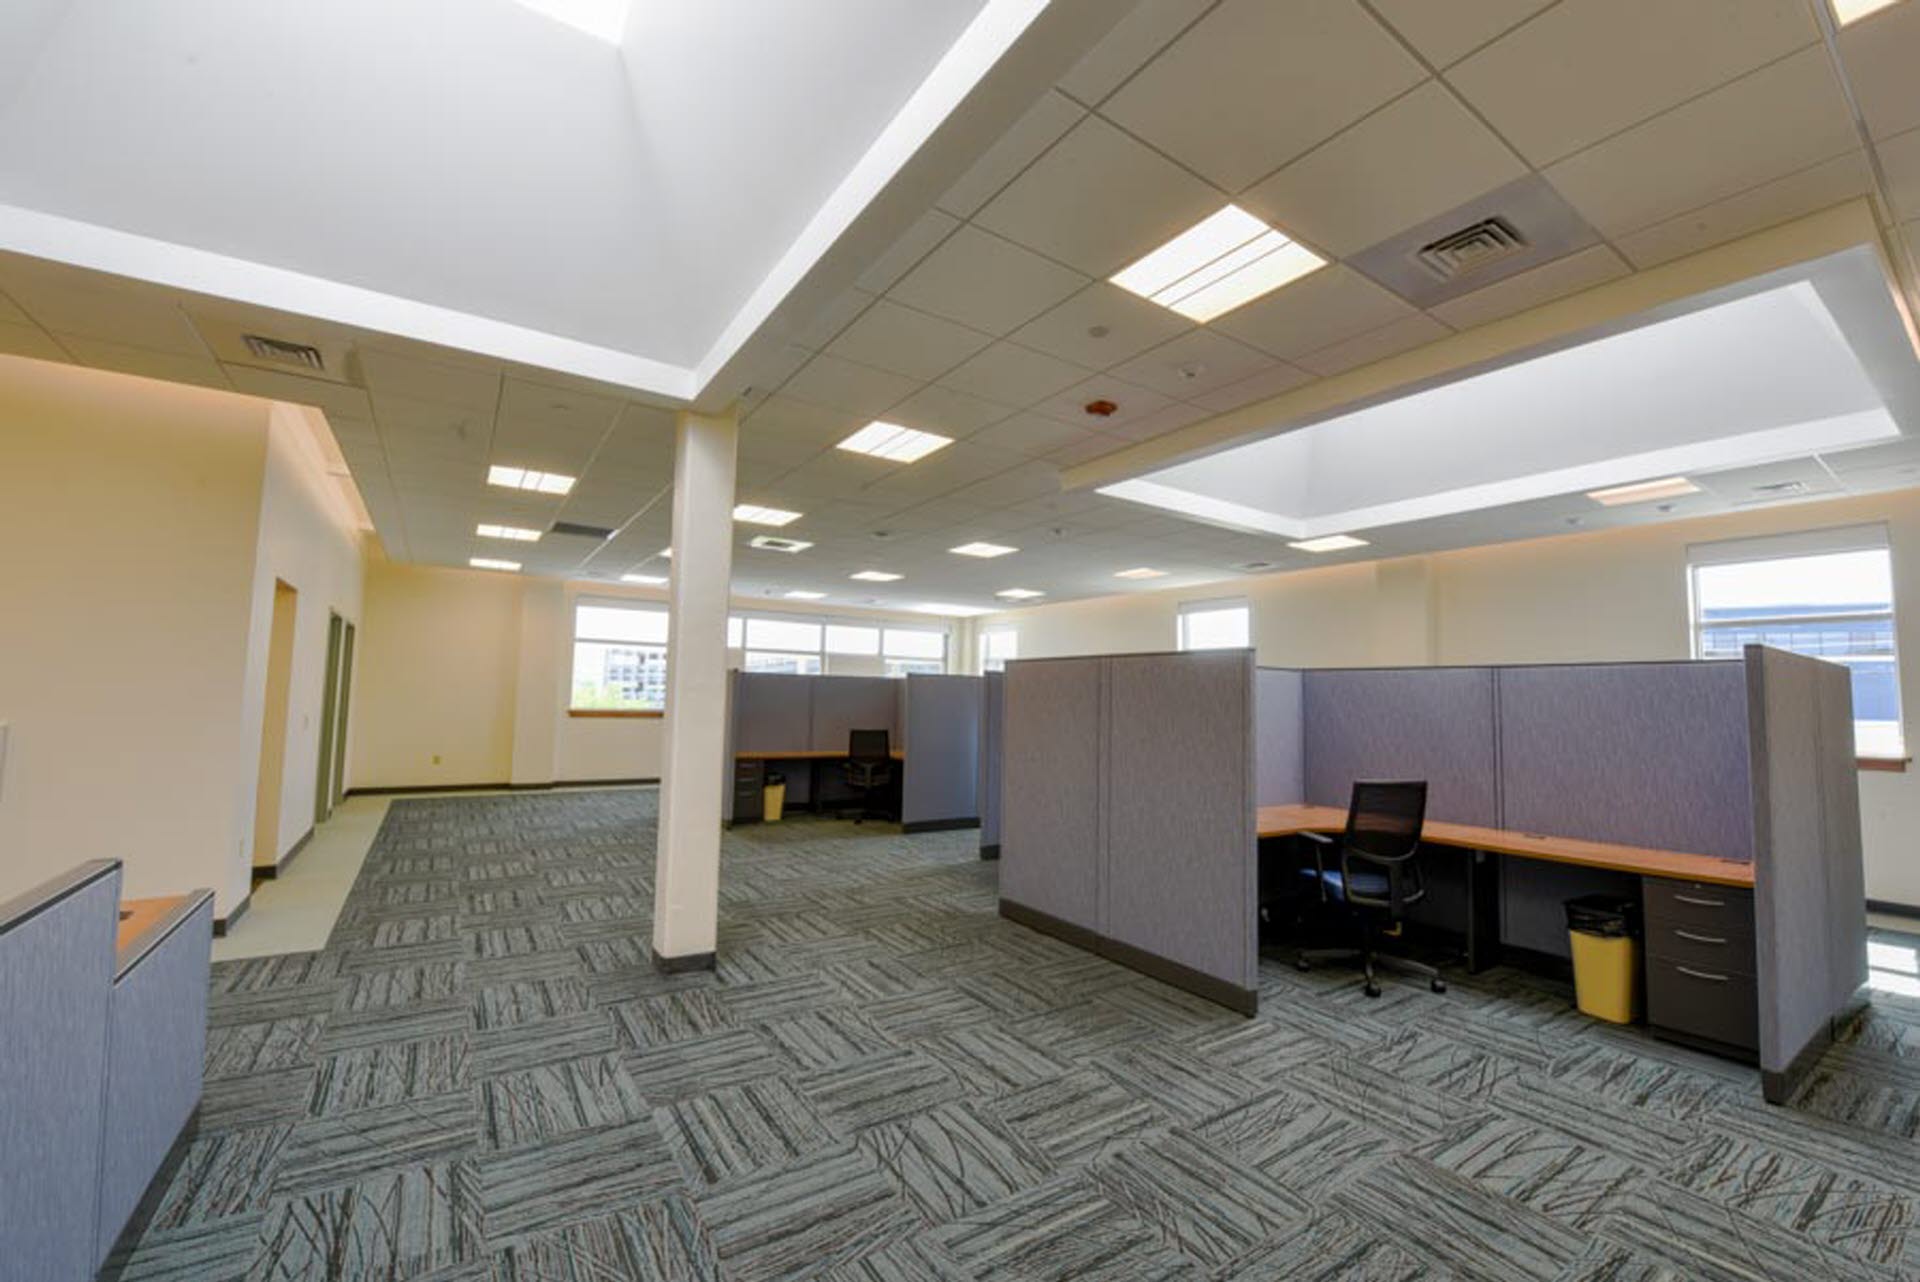 Windows and Skylights allow natural light into the Open Office Areas